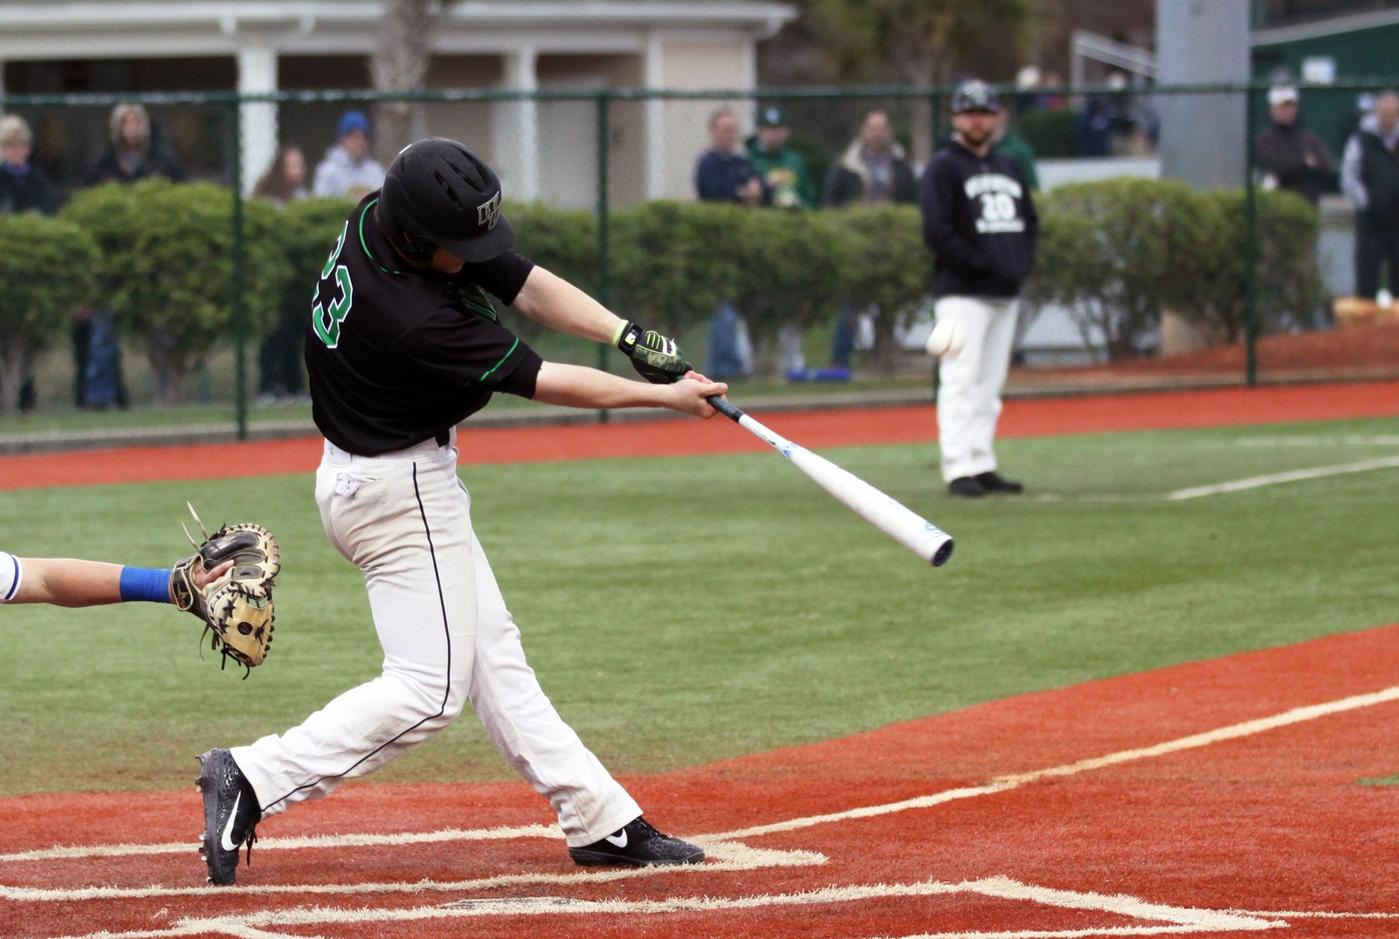 Copyright 2019; Wilmington University. All rights reserved. File photo of Eddie Nevins who had two home run on the day, collecting eight RBI in the doubleheader against Bloomfield. Photo by Dan Lauletta. February 22, 2019 vs. New Haven at Myrtle Beach, S.C.